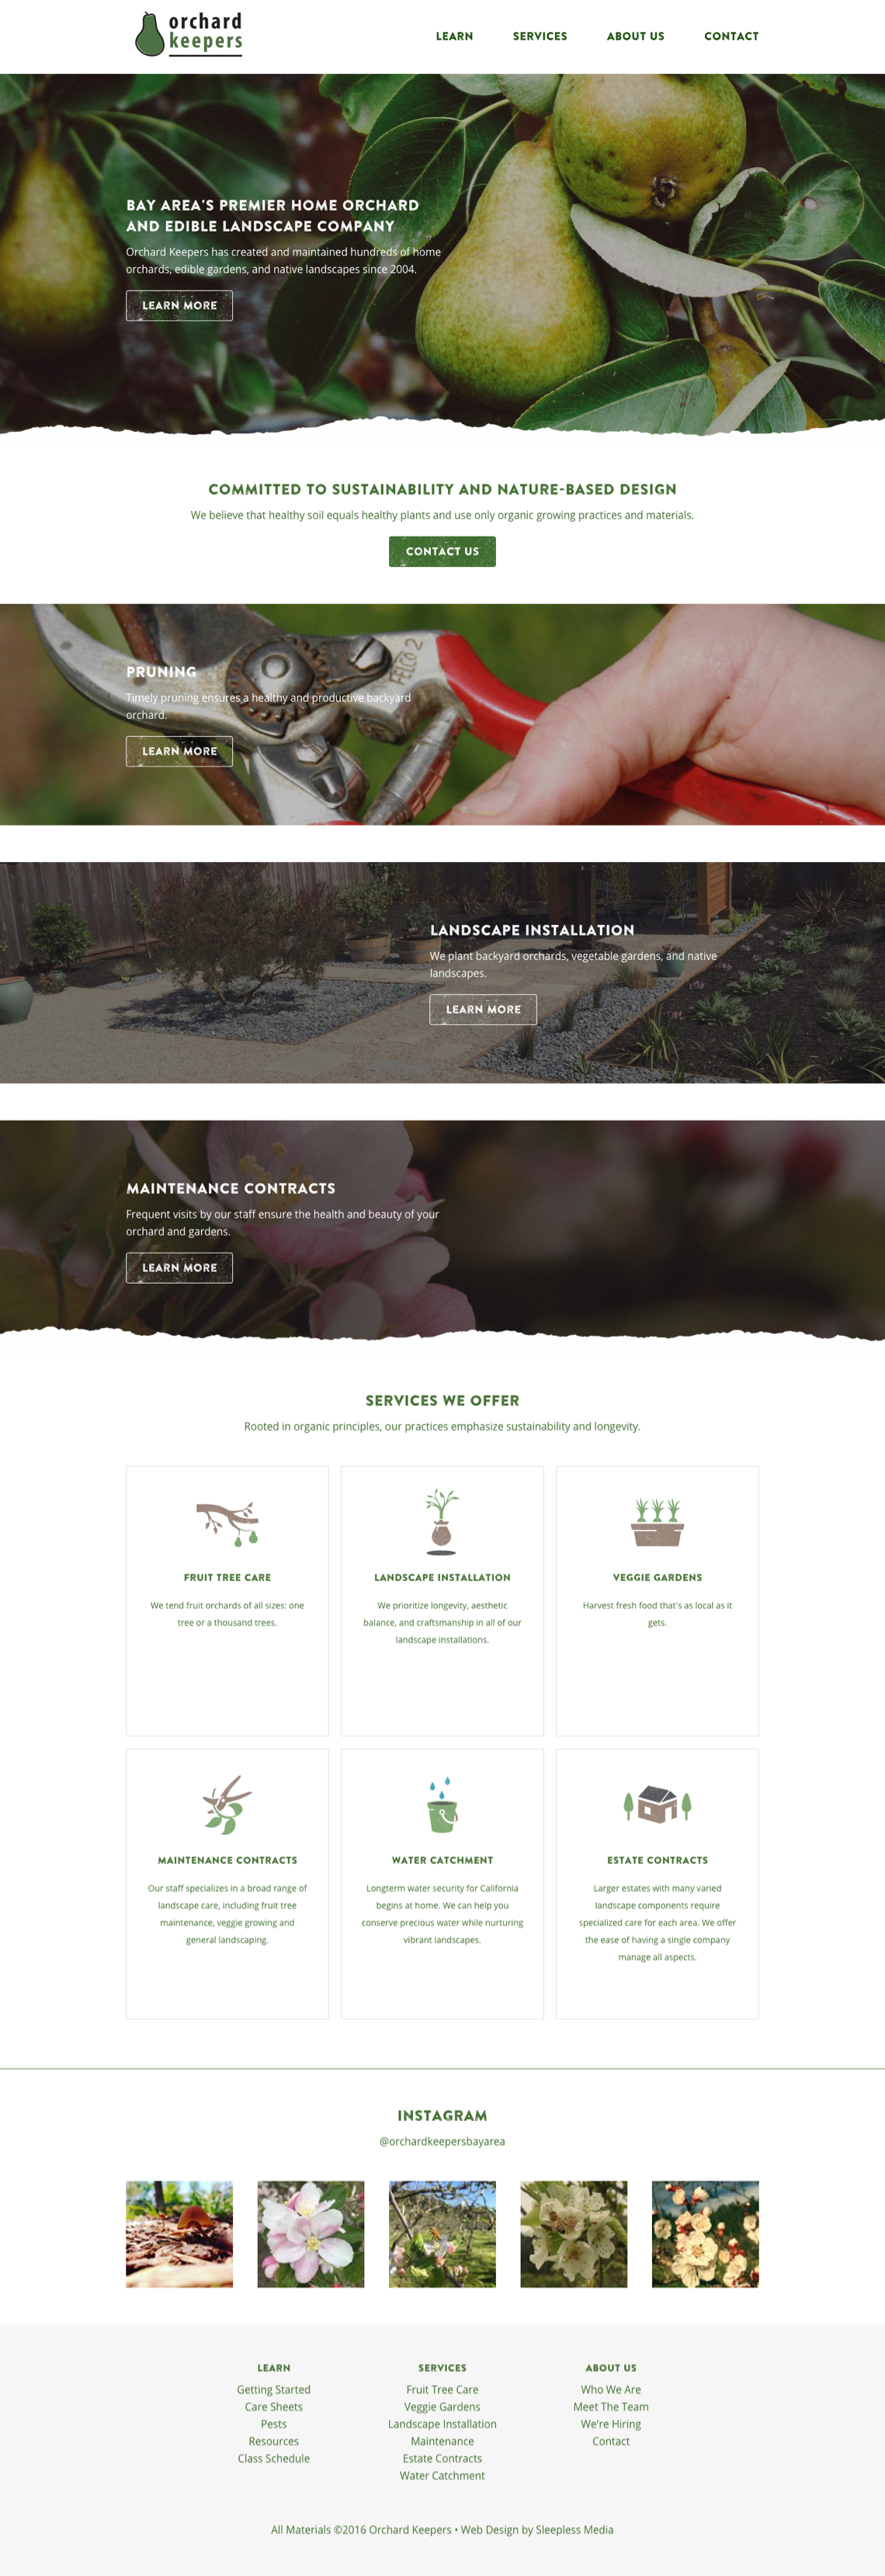 Orchard Keepers Homepage